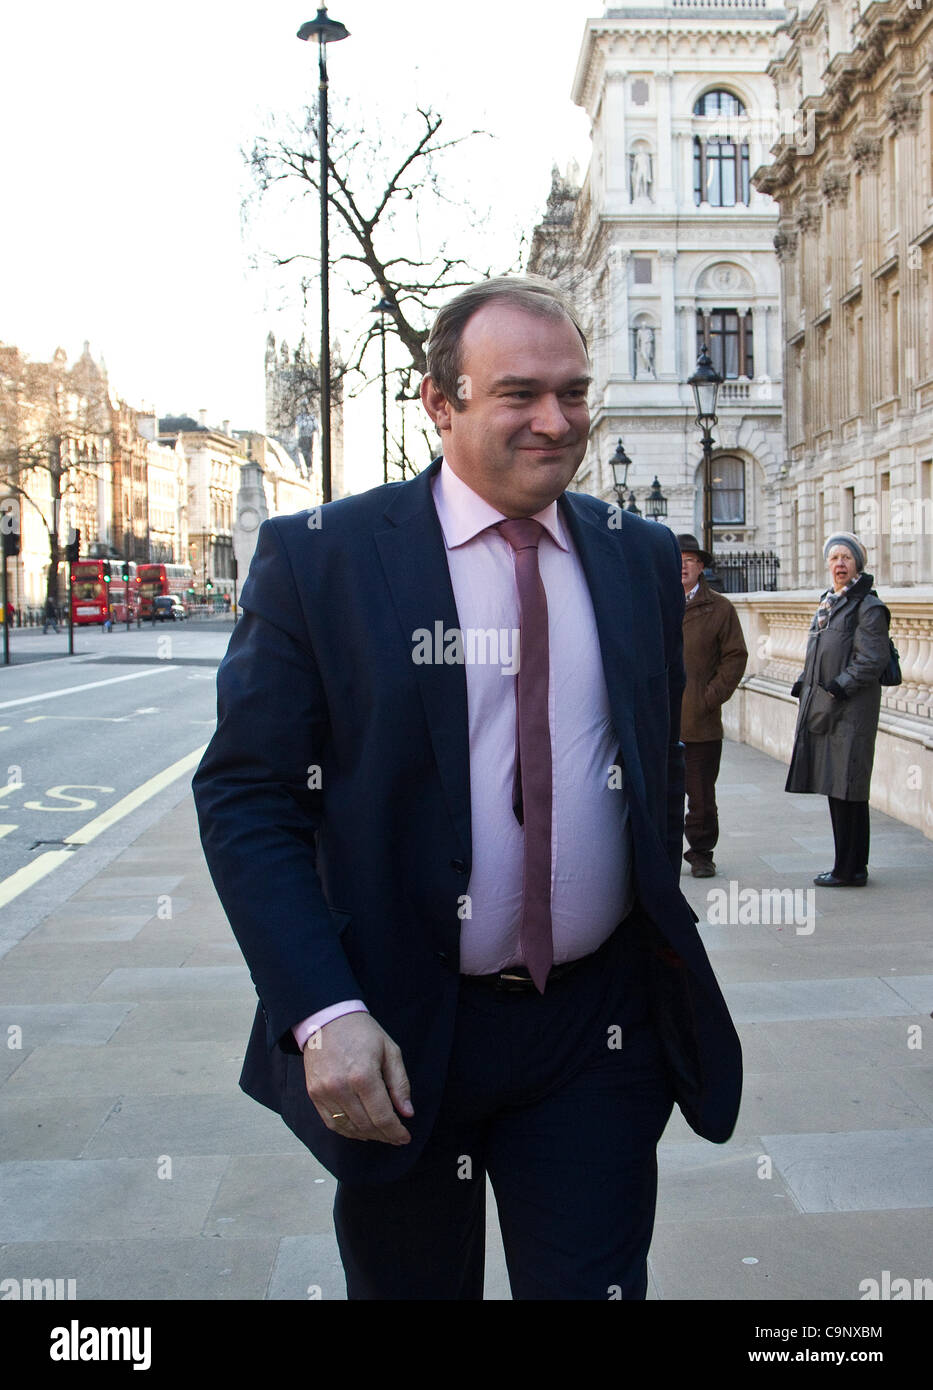 Whitehall, London, UK. 03.02.2012 Ed Davey arriving at Whitehall to become the new Secretary of State for Energy and Climate Change. His appointment followed the resignation of Chris Huhne. Stock Photo